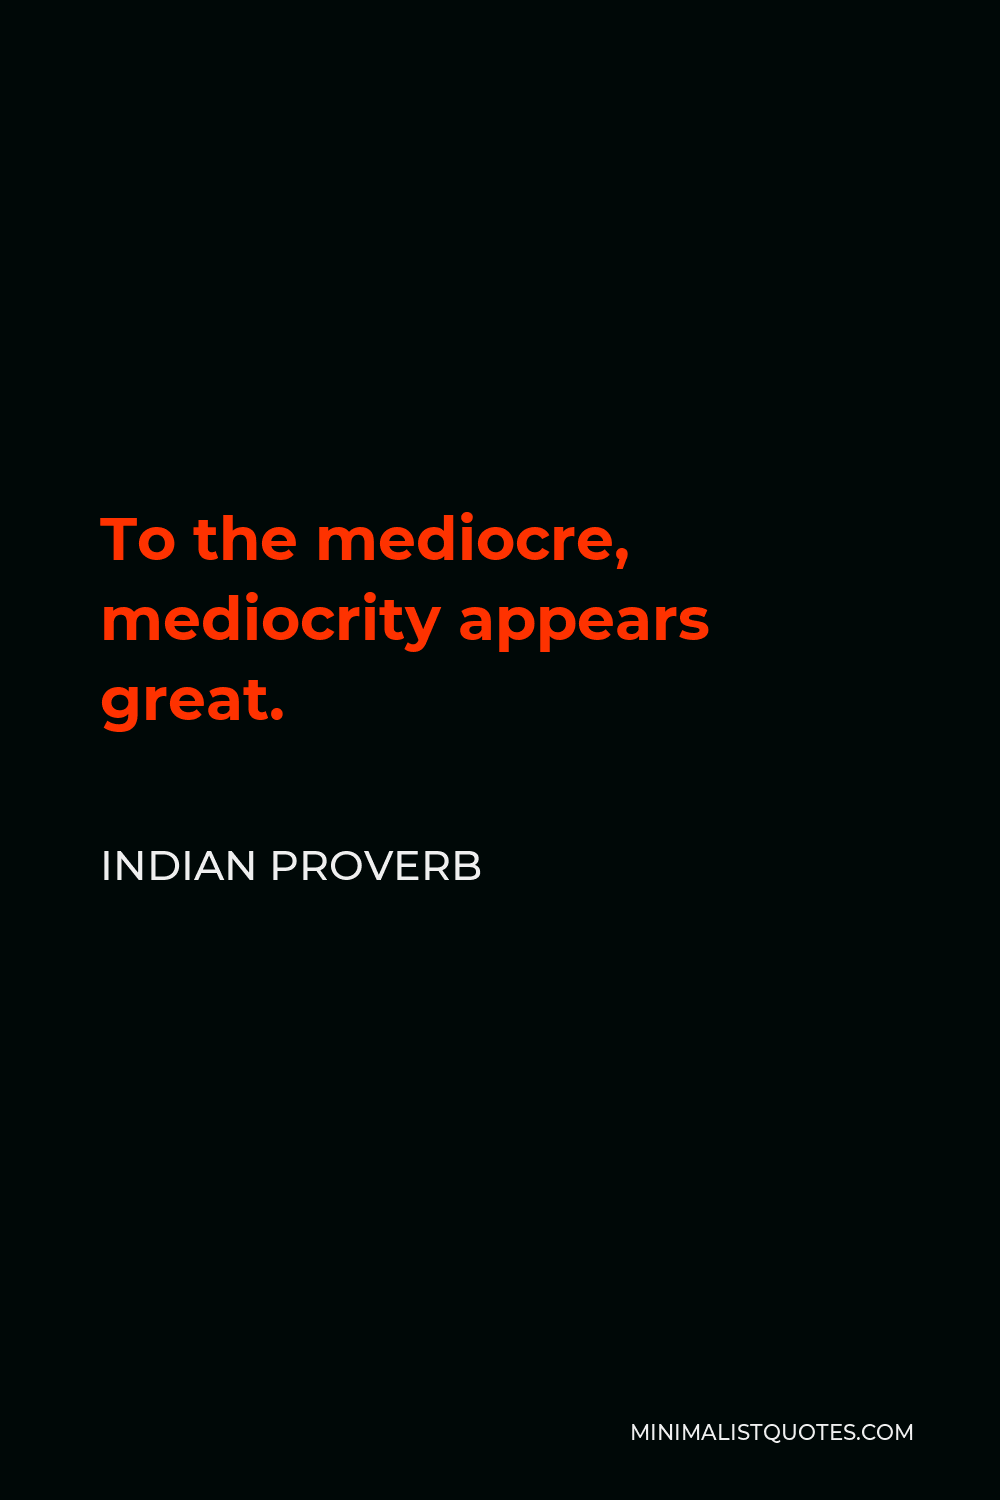 Indian Proverb Quote - To the mediocre, mediocrity appears great.